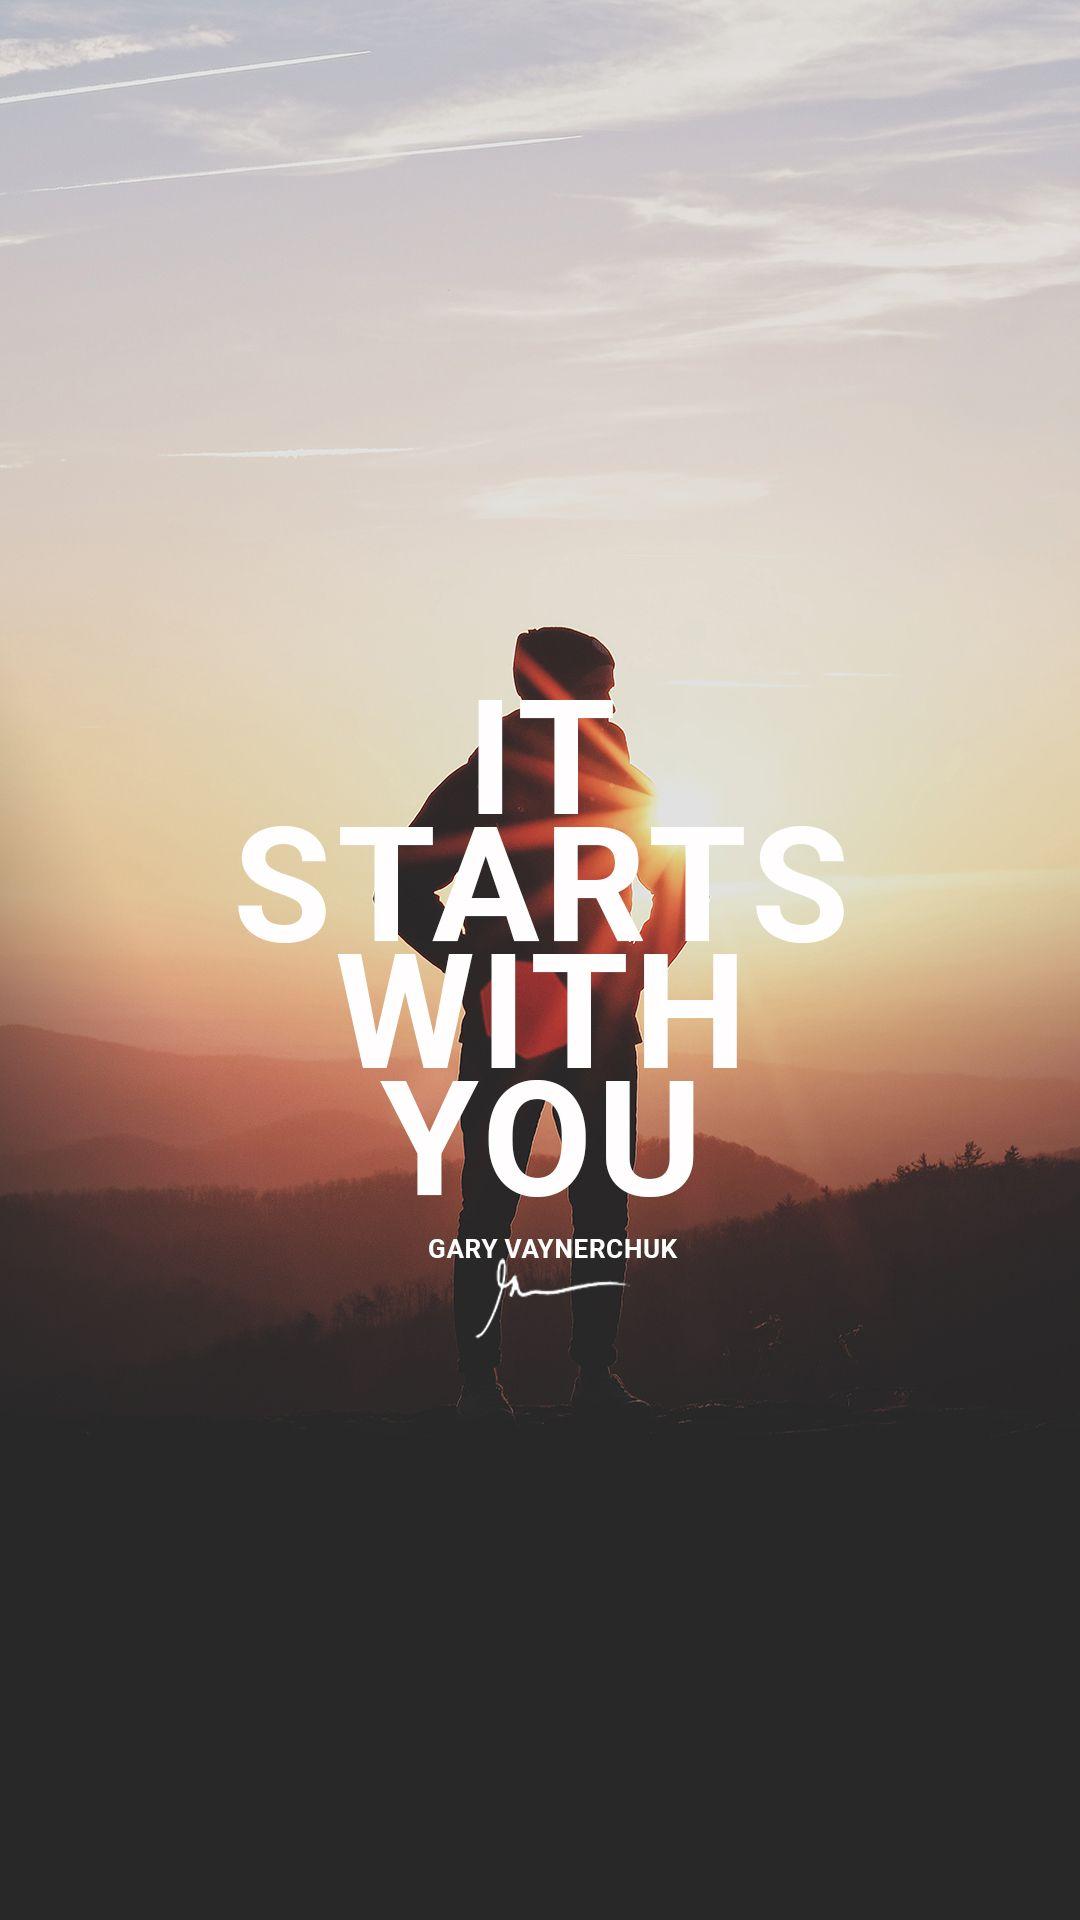 It starts with you. Quotes by Gary Vaynerchuk Motivational Millionaire Wallpaper. Gary vaynerchuk quotes, Motivational quotes wallpaper, Motivational wallpaper